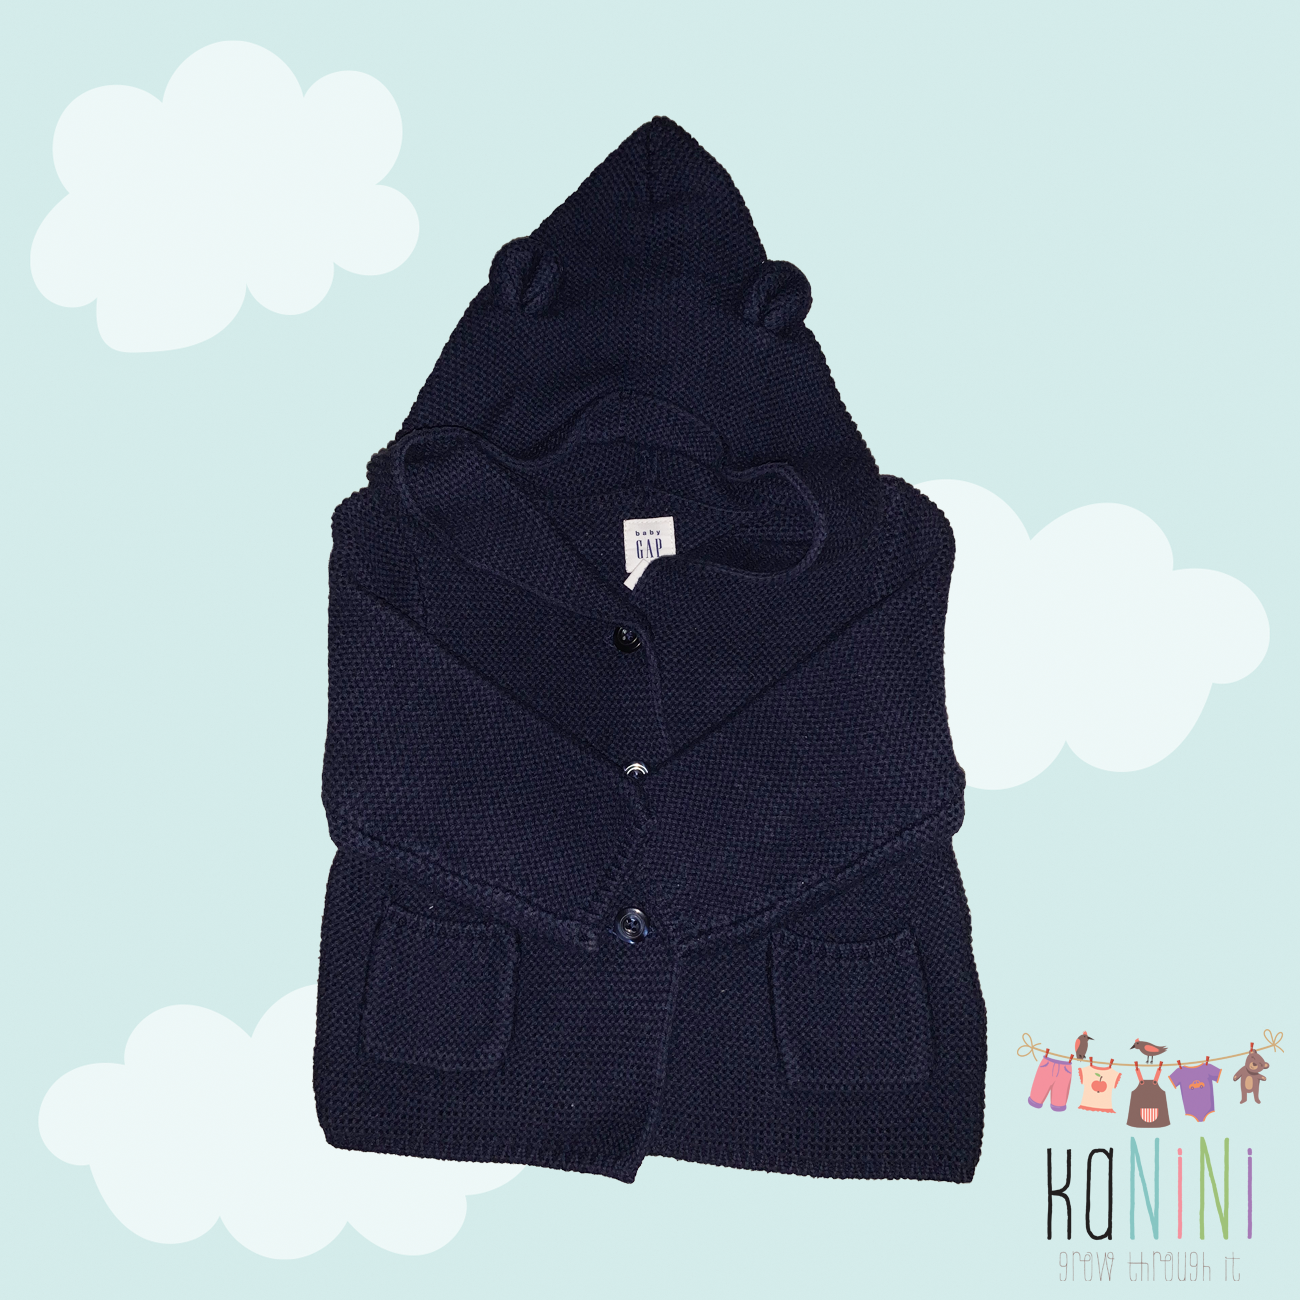 Featured image for “BabyGAP 0 - 3 Months Boys Knitted Hoodie”